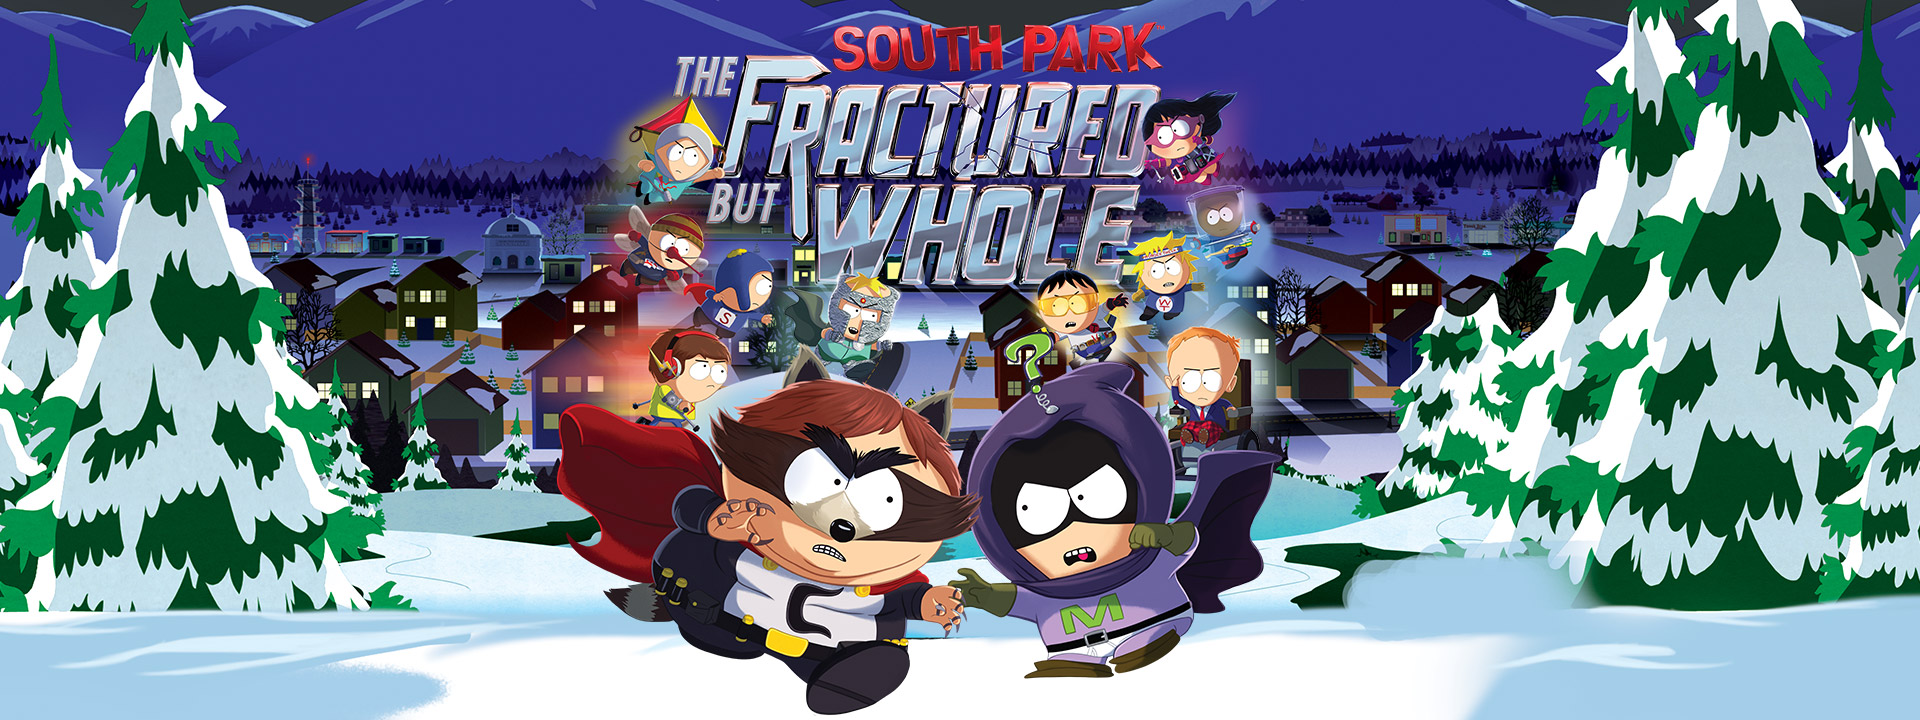 South Park: The Fractured but Whole "Превью"